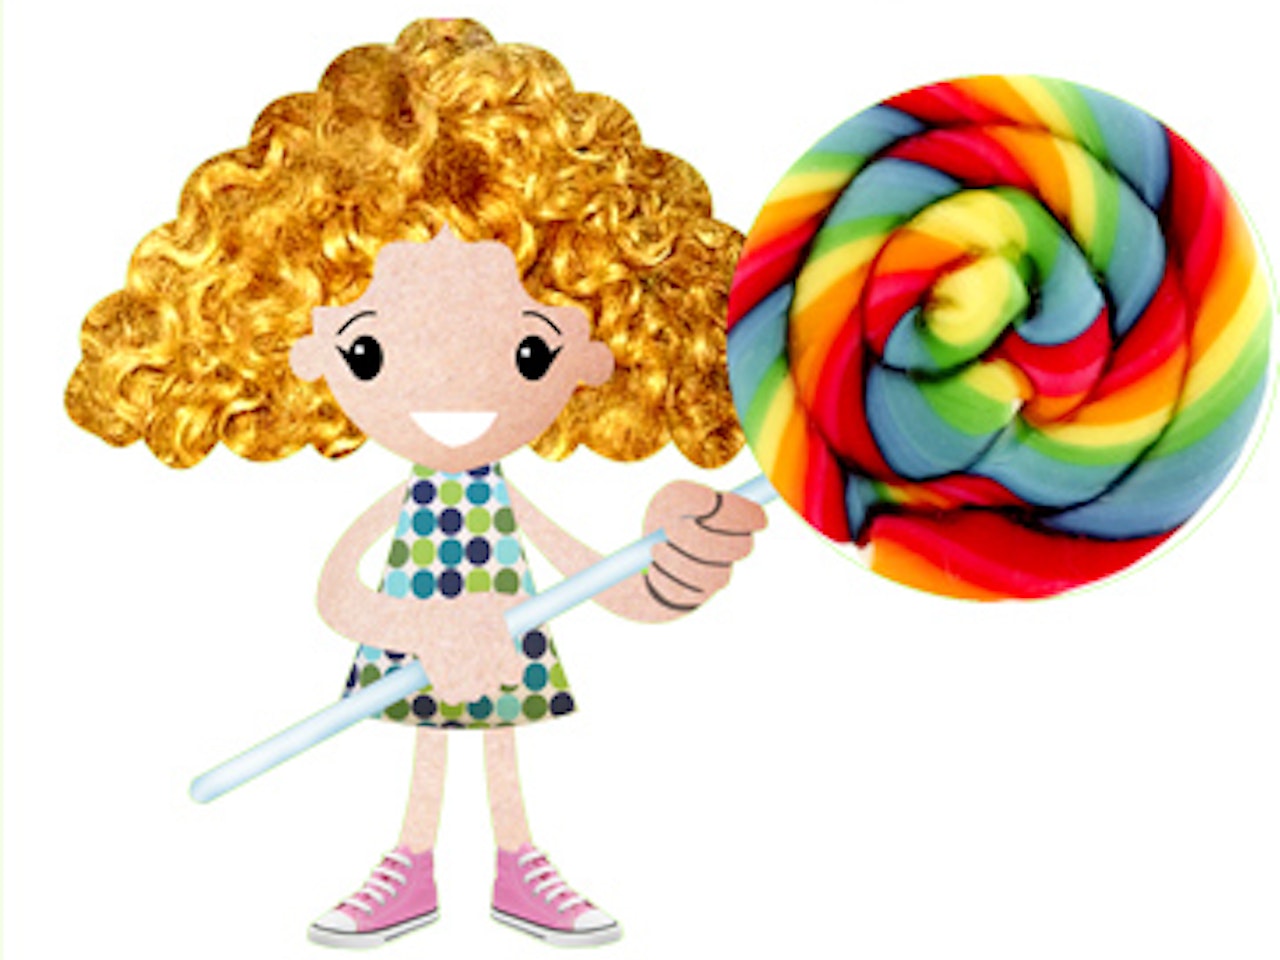 curly hair girl with lollipo collage funny happy humorous comical colourful graphic illustration   retro vintage 1950s textile patterns